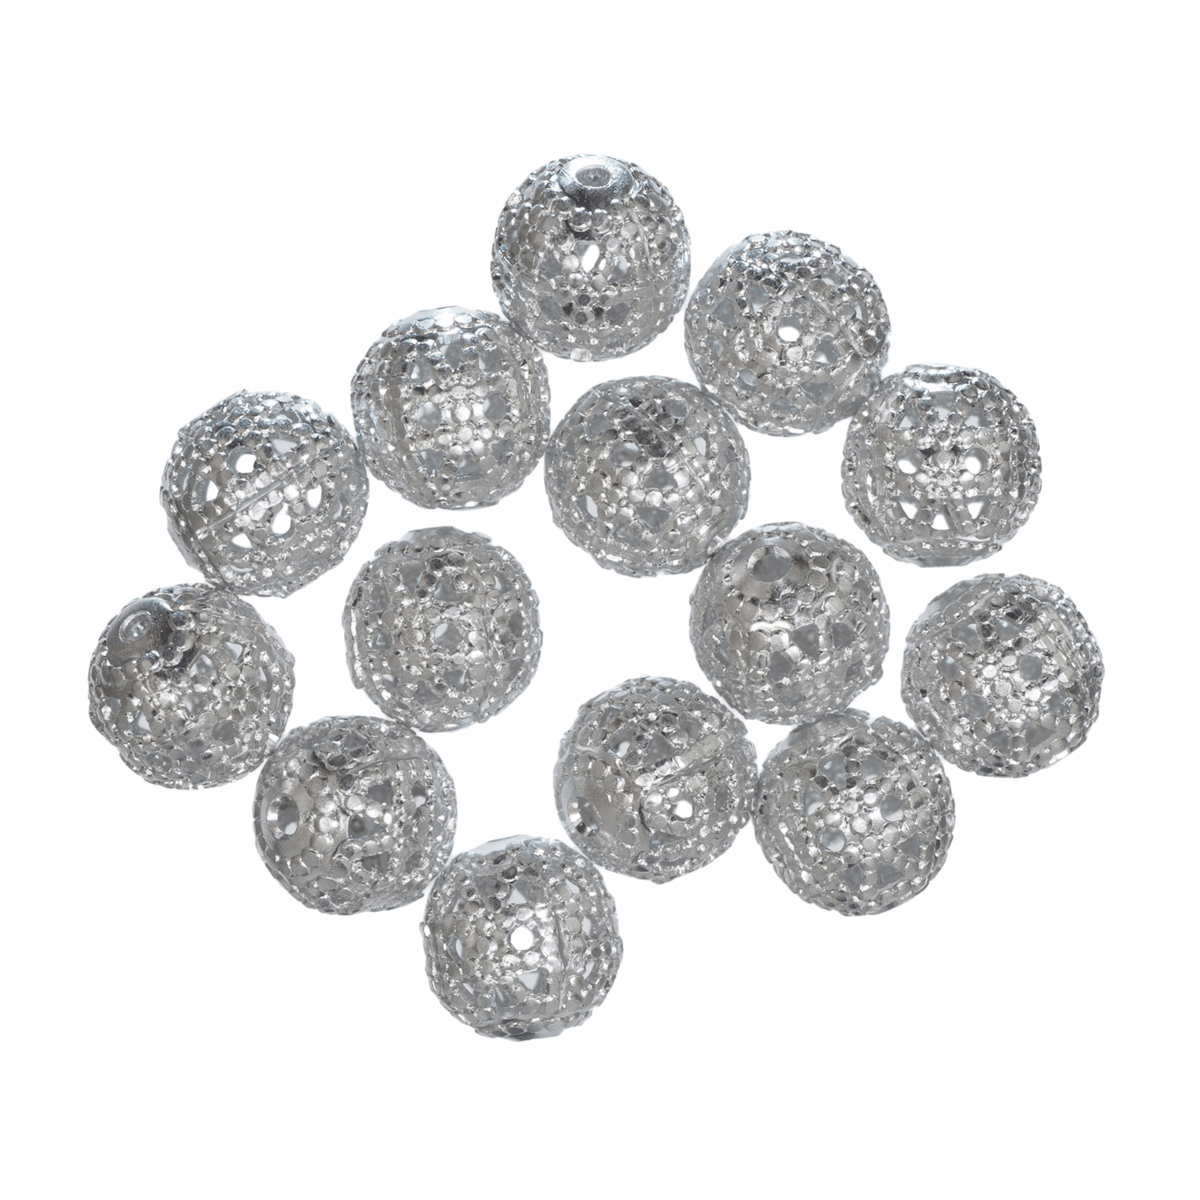 Trimits Deluxe Filigree Silver Plated Beads - 6mm (Pack of 14)